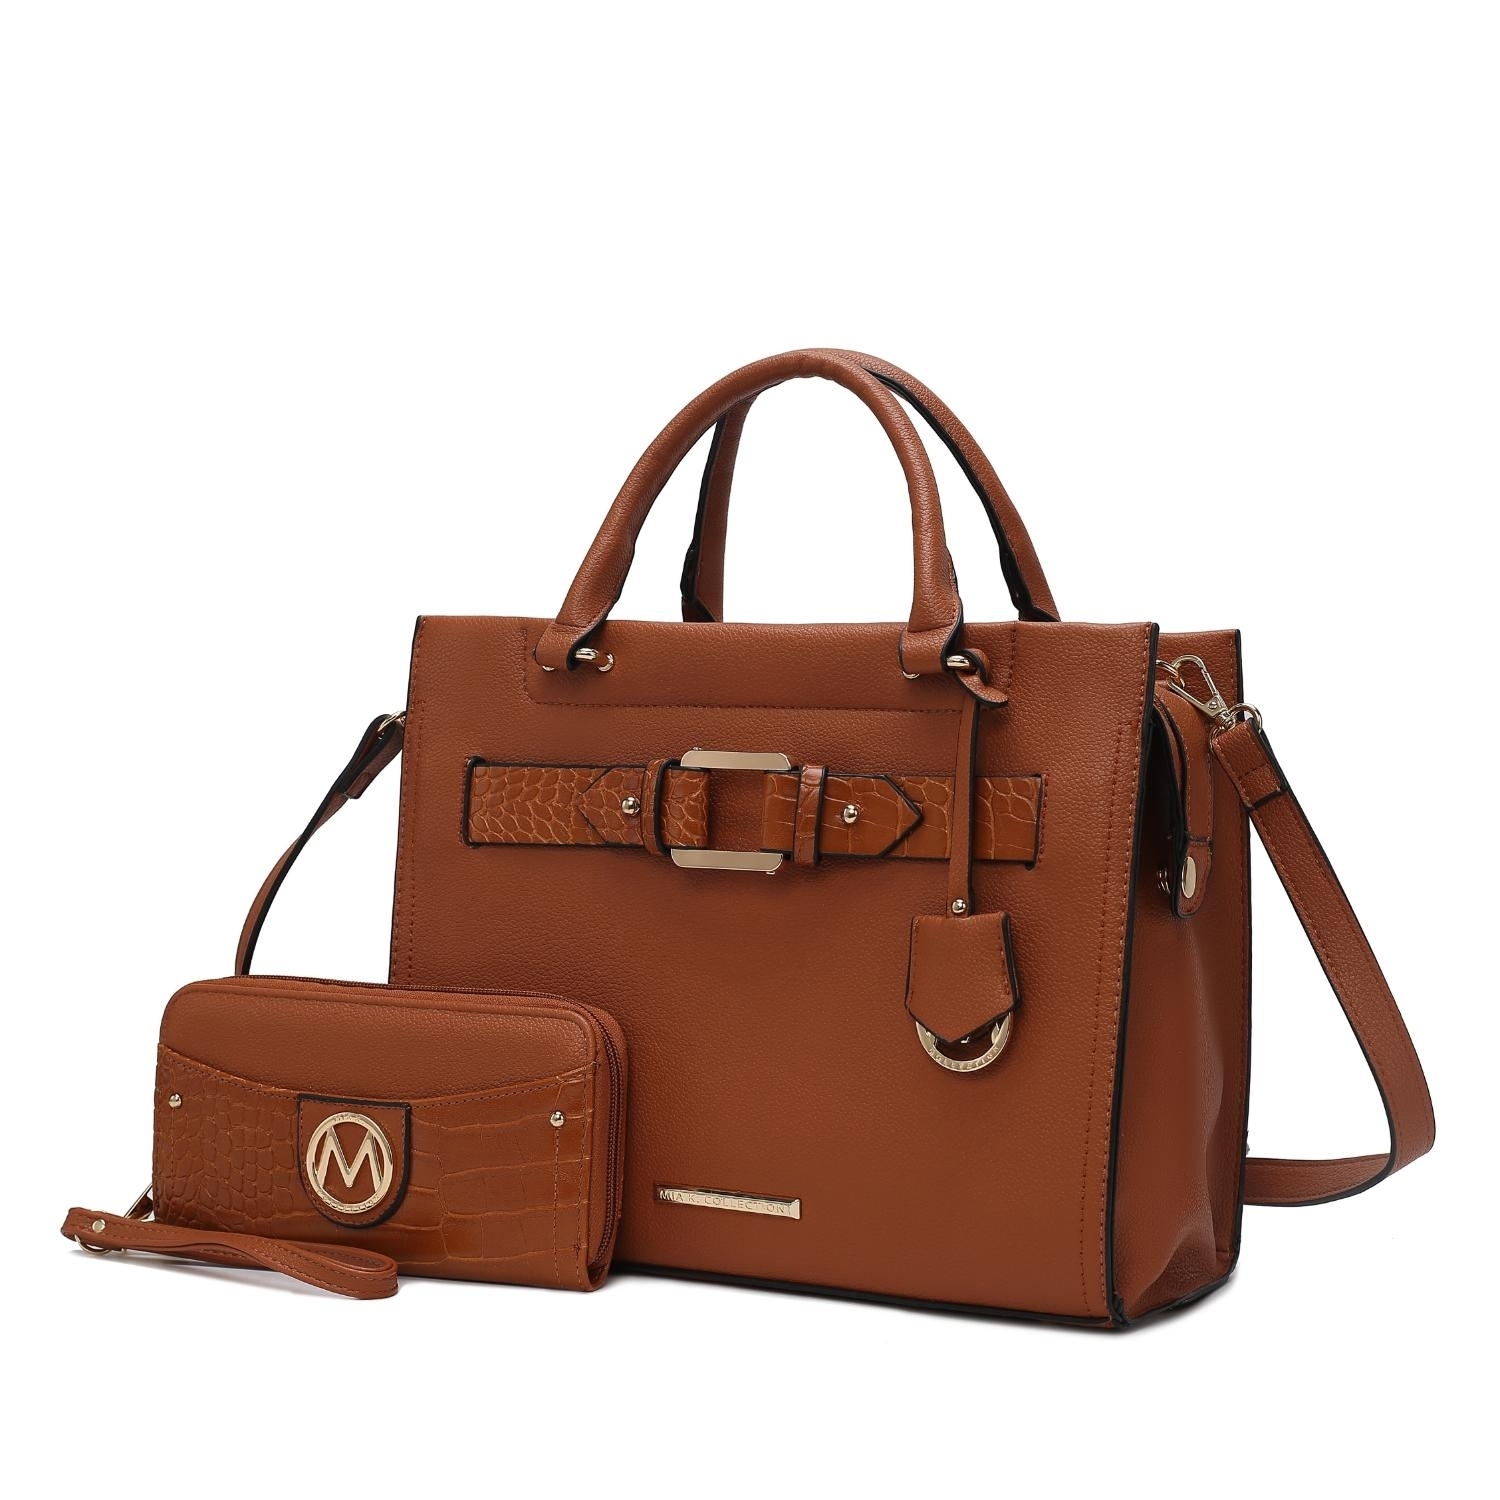 MKF Collection Virginia Vegan Leather Women's Tote Bag By Mia K With Wallet -2 Pieces - Cognac